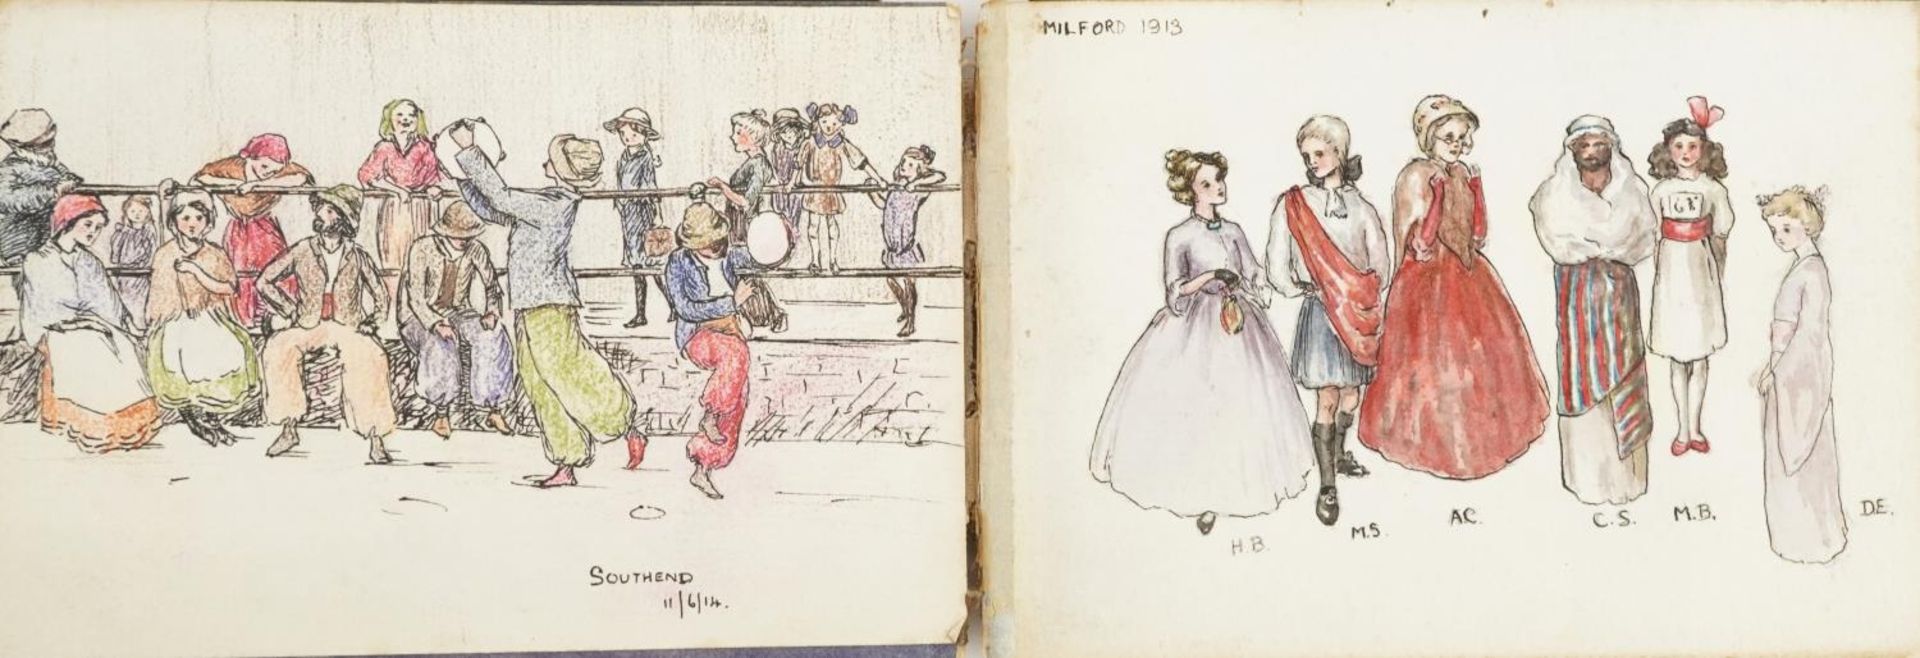 Early 20th century artist's travel sketchbook housing various watercolours and pencil sketches